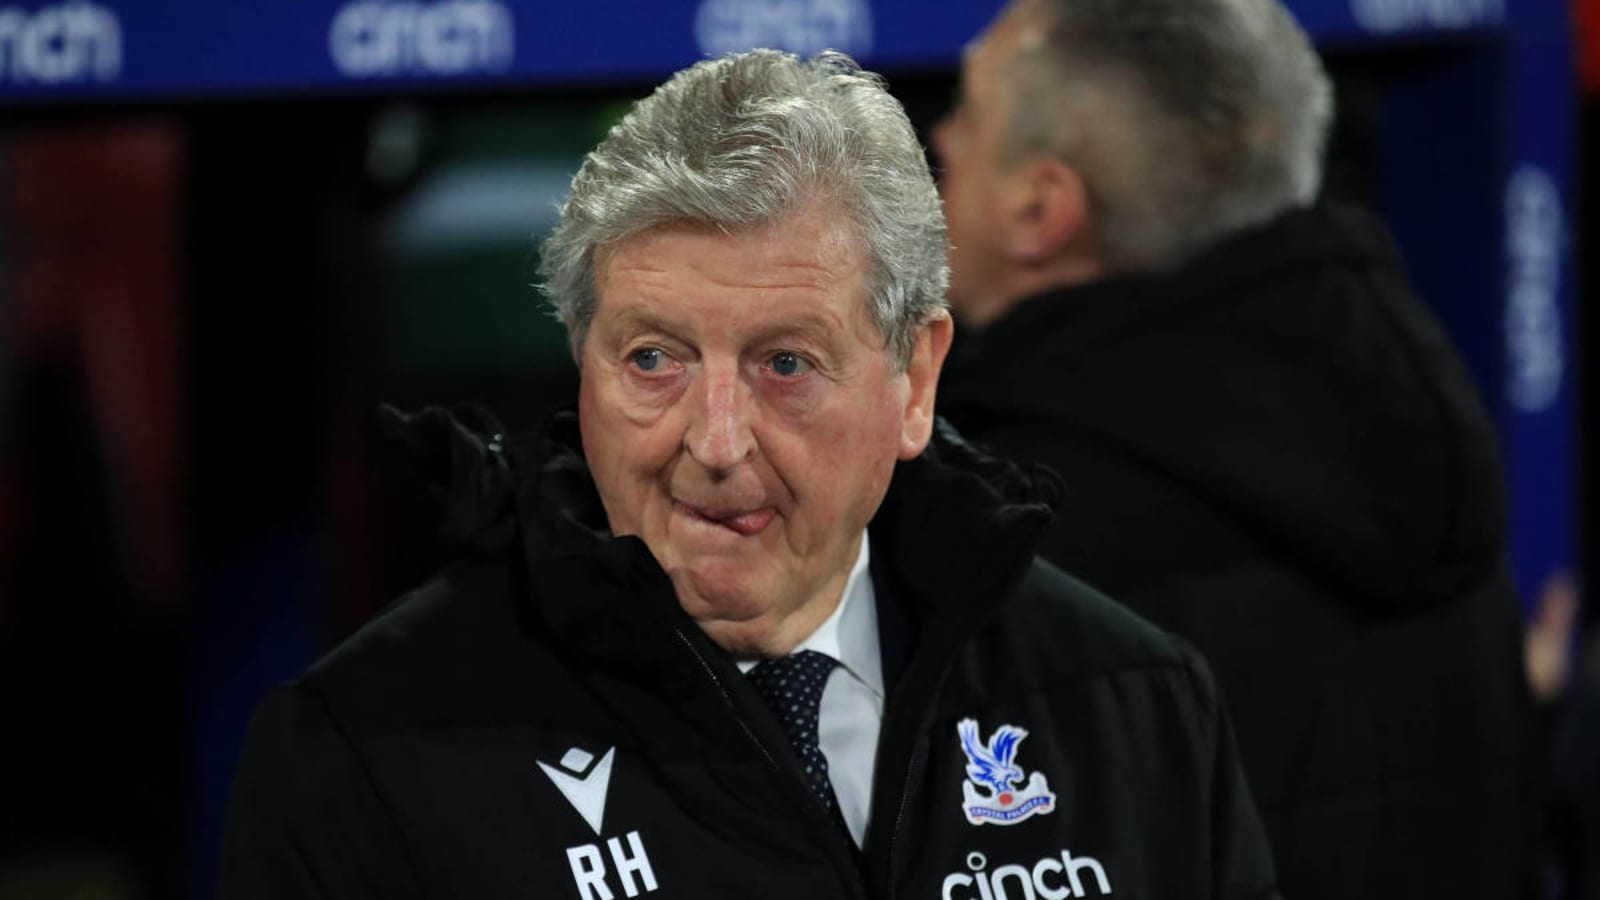 Roy Hodgson Undergoes Tests in Hospital After Being "Taken Ill" During Crystal Palace Training Session